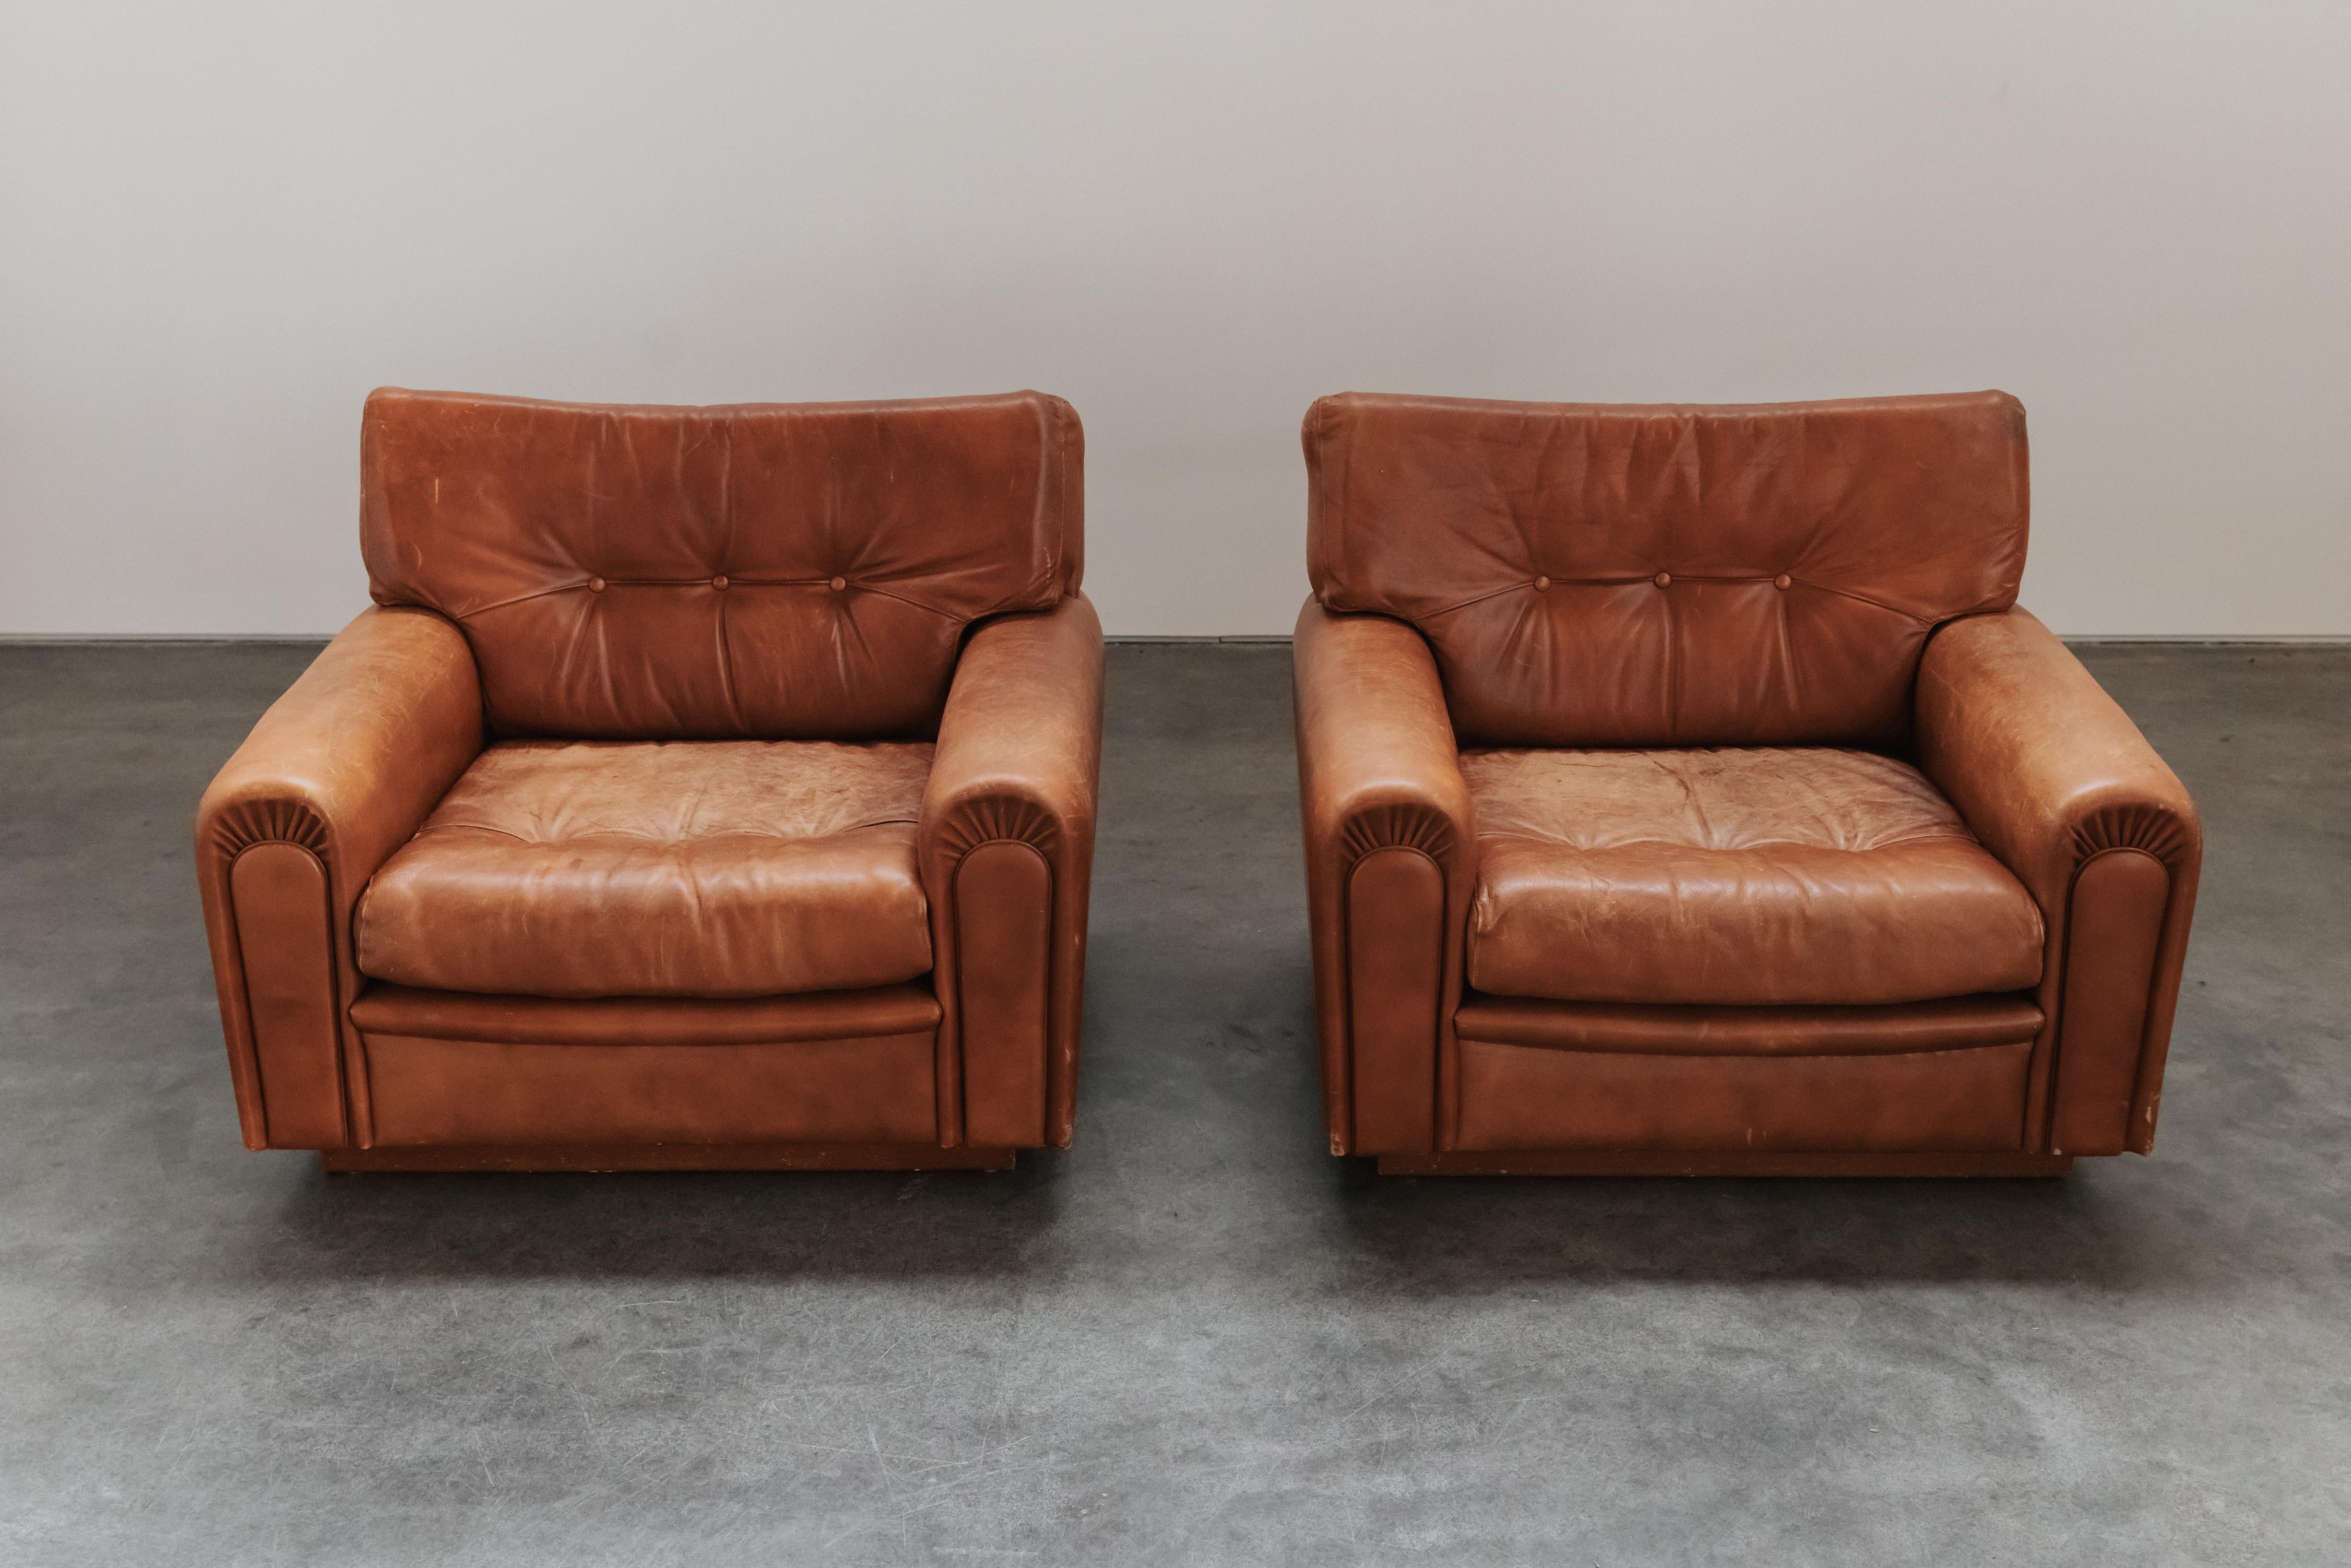 Vintage Pair Of Leather Lounge Chairs By OPE, From Sweden, Circa 1970.  Very comfortable model with original brown leather upholstery.  Great patina and use.  